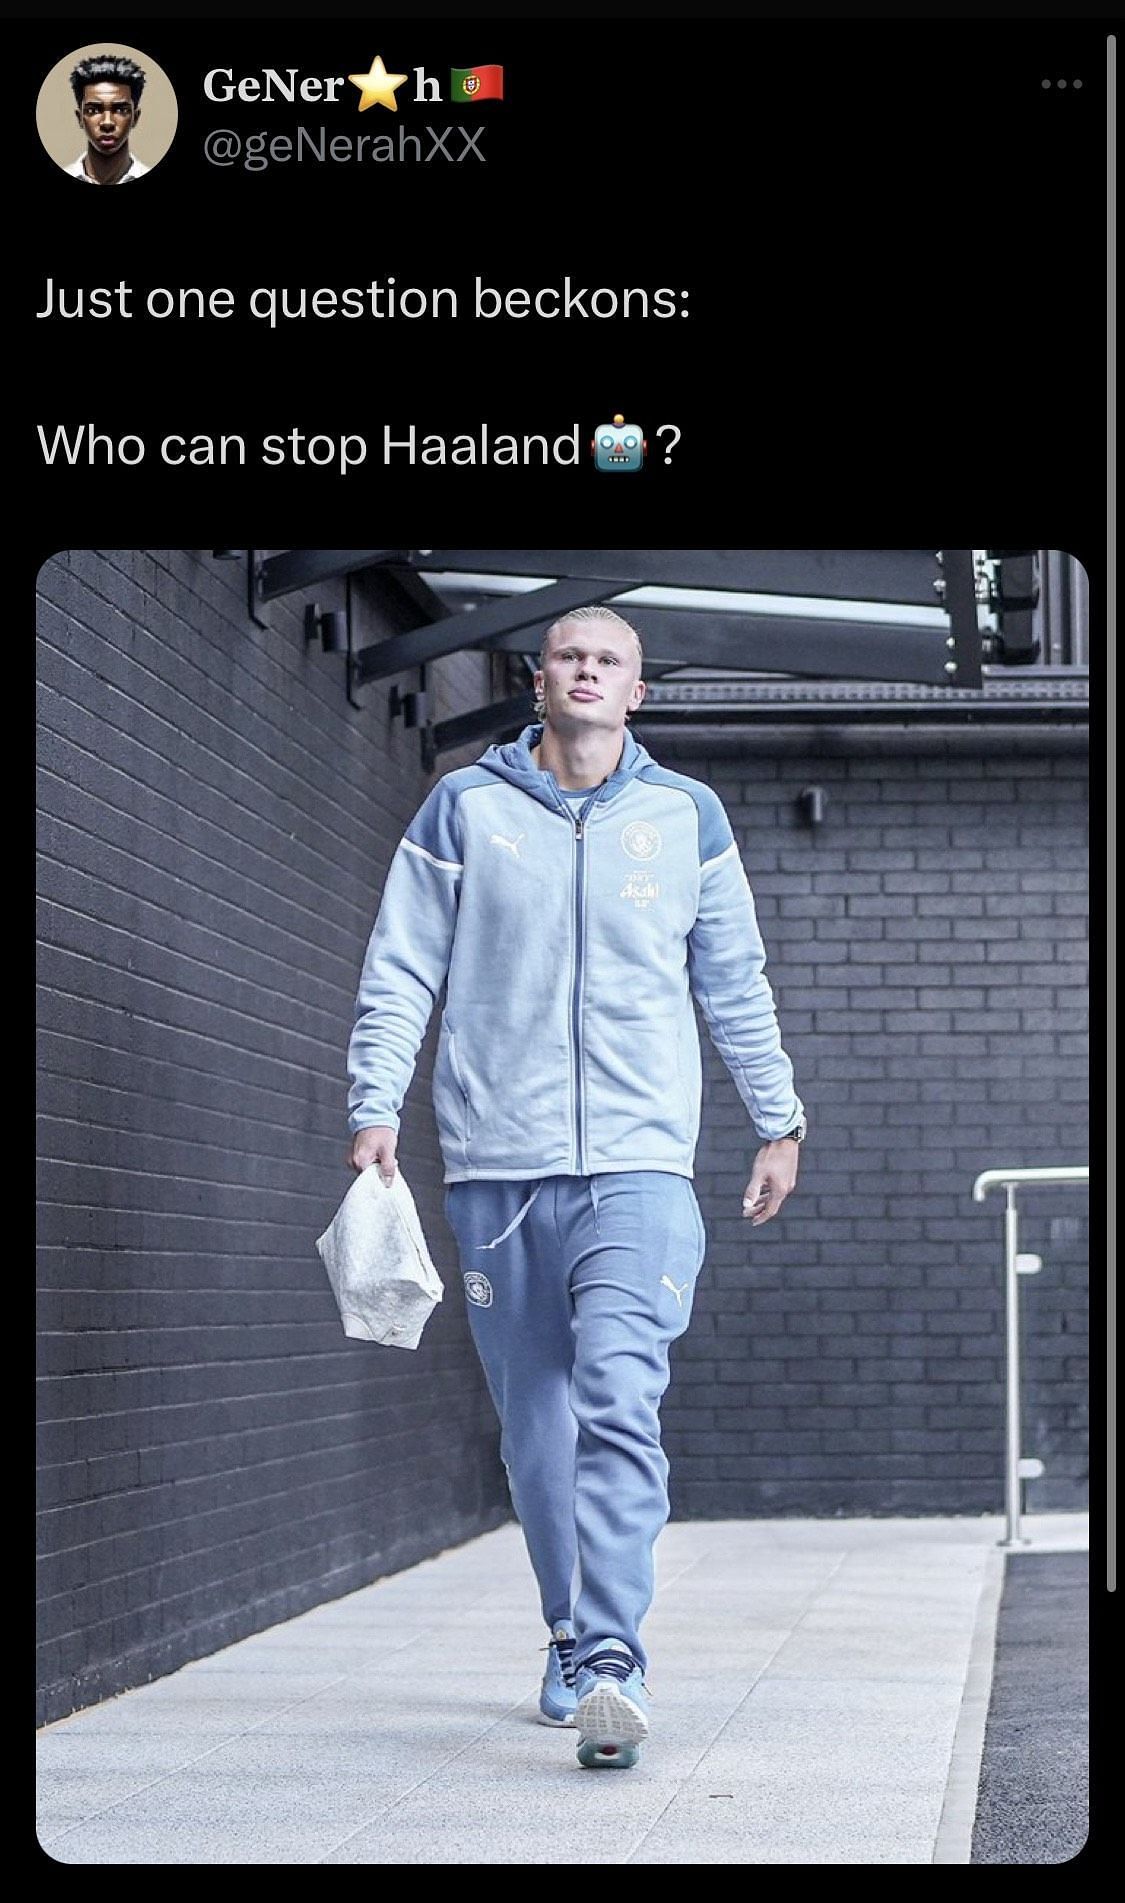 Fan asks who can stop the City frontman.